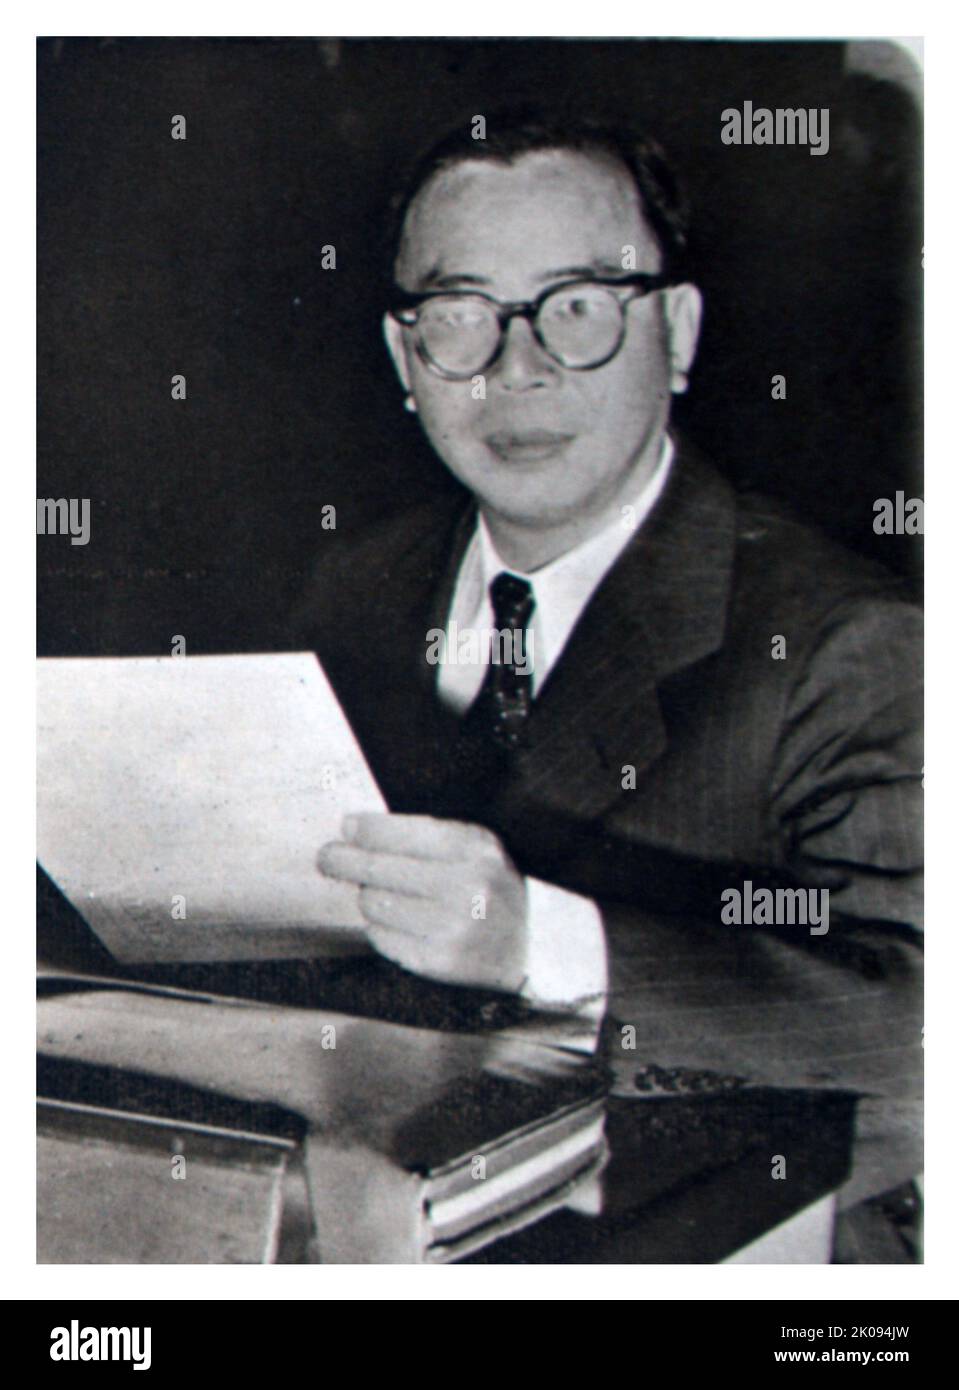 The Fifty Nine Nations assembly at the General Assembly Hall at Flushing Meadow, New York on Saturday, 29 November 1947. Dr T.S. Tsiang, the Chinese delegate, who delivered an attack on Soviet policy. Stock Photo